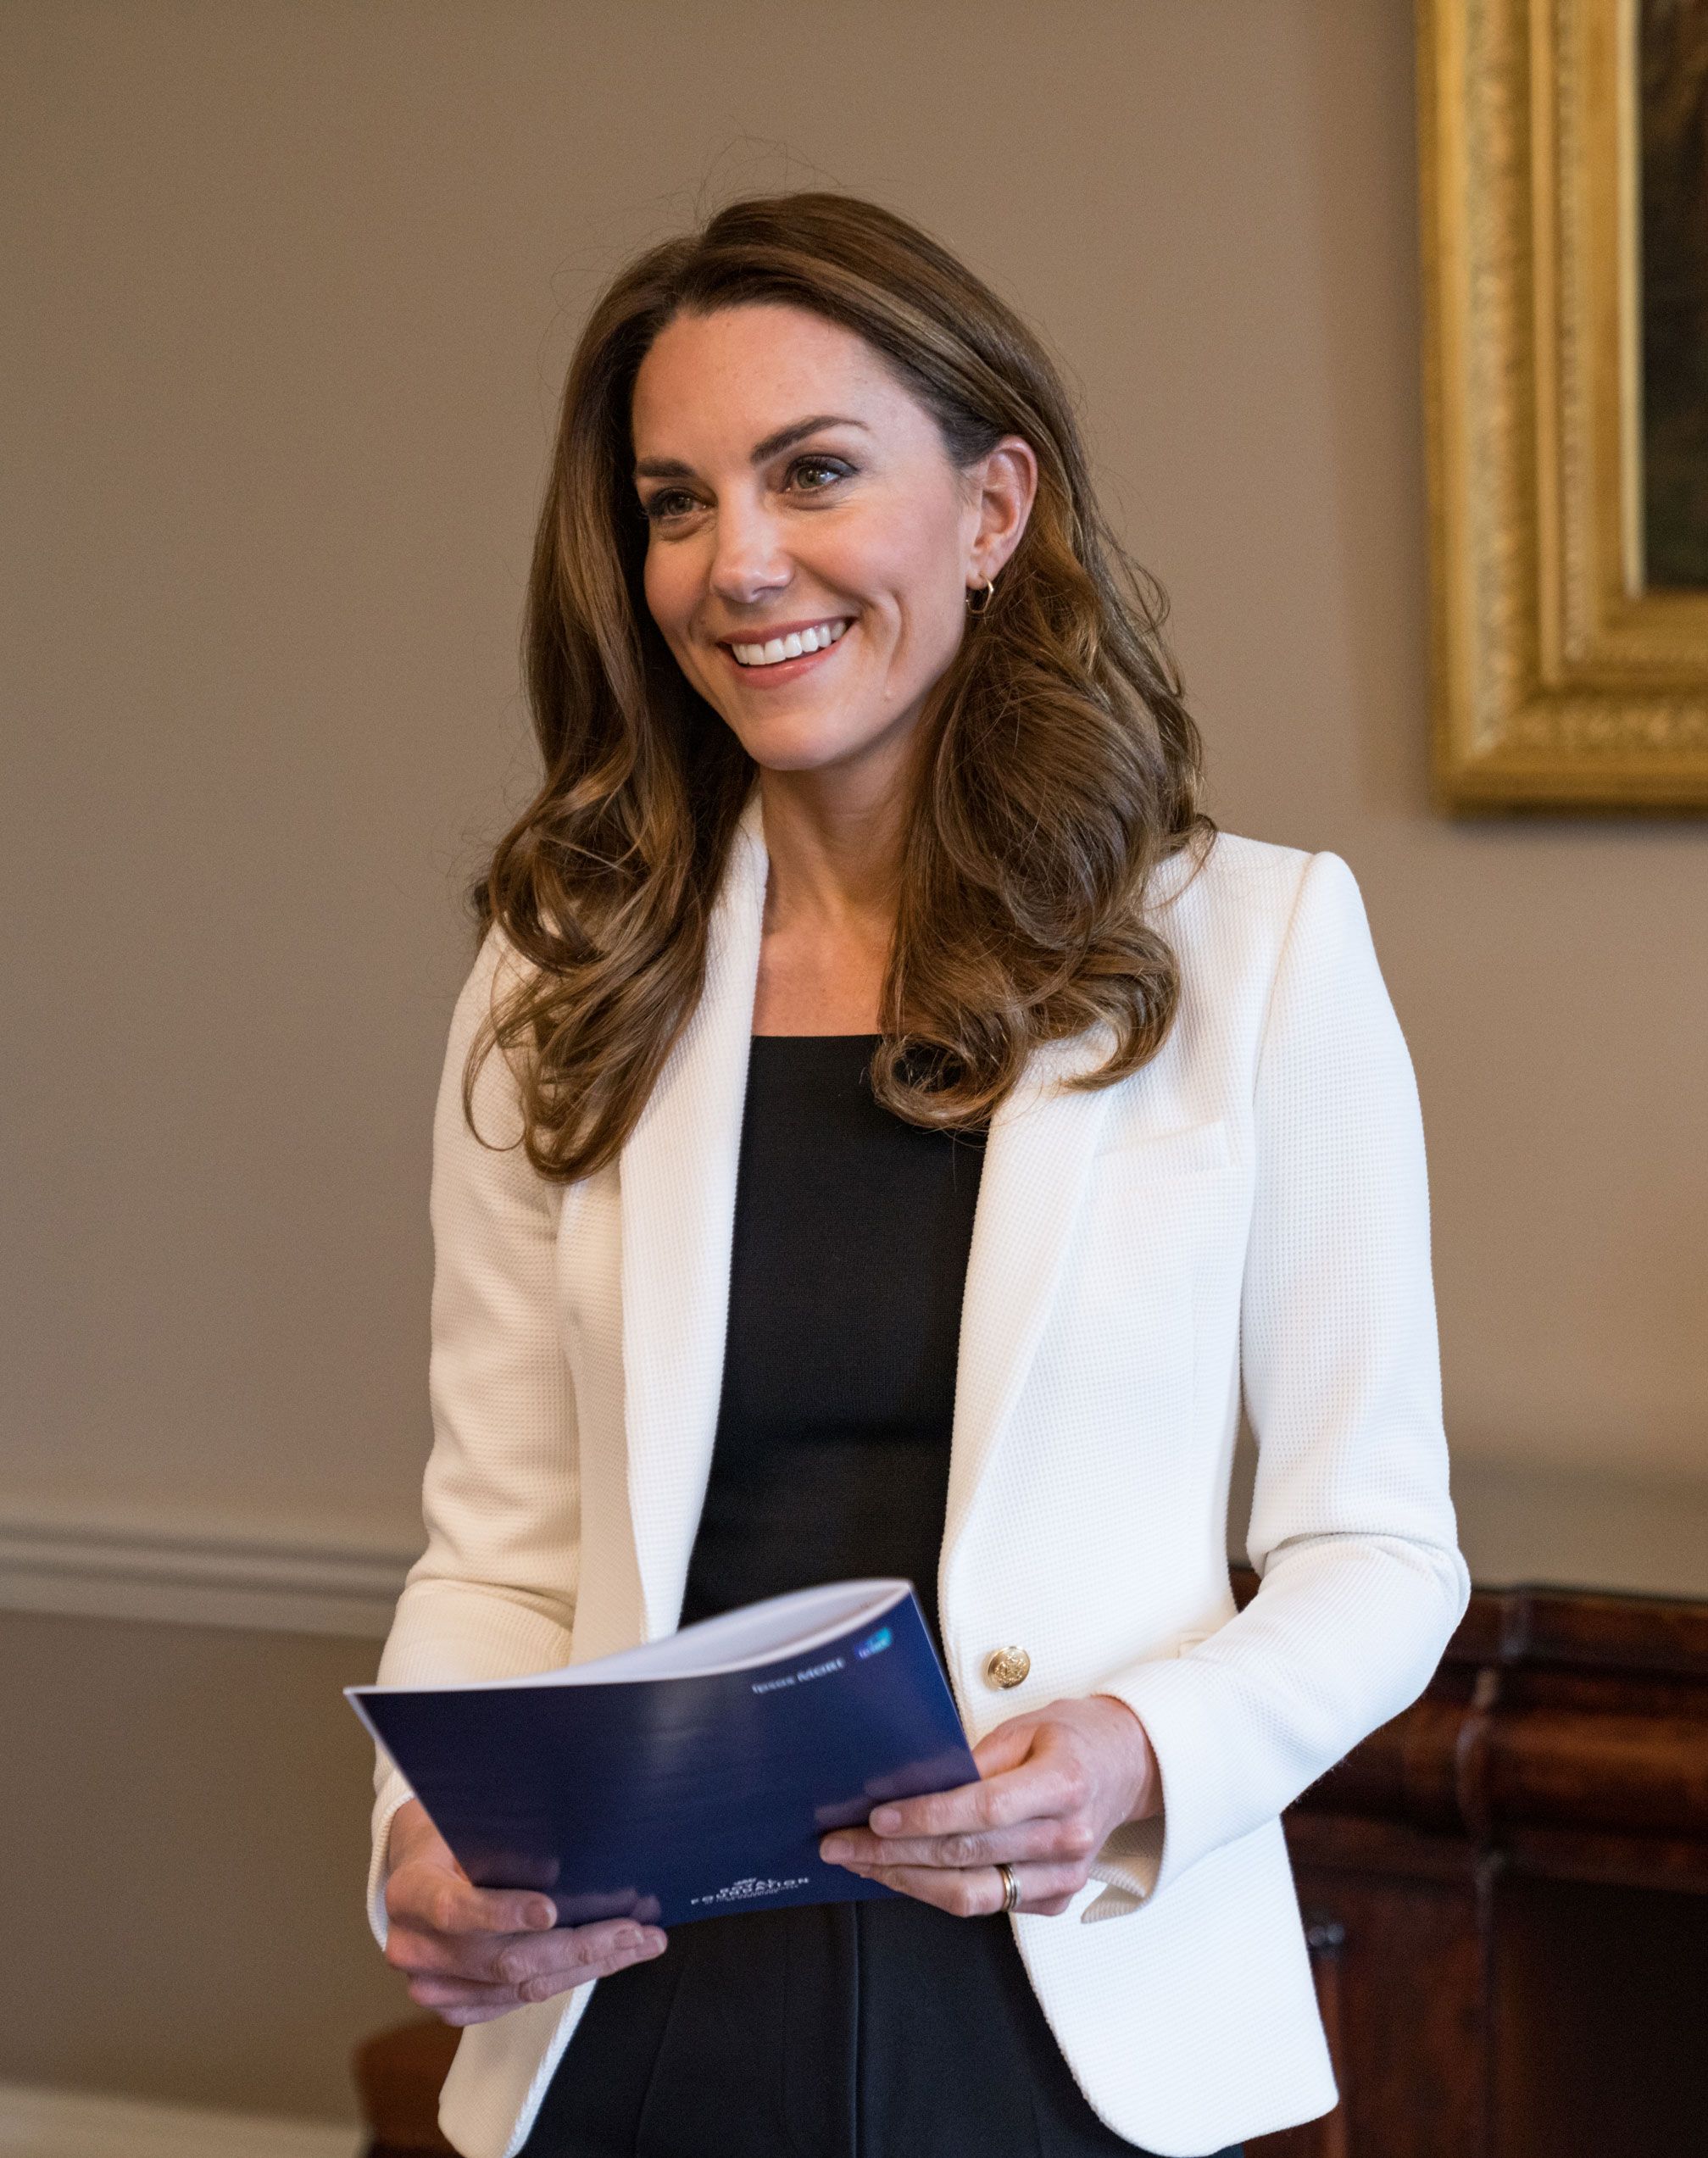 Kate Middleton to Reveal the Findings from Her Early Years Research in Key  Speech